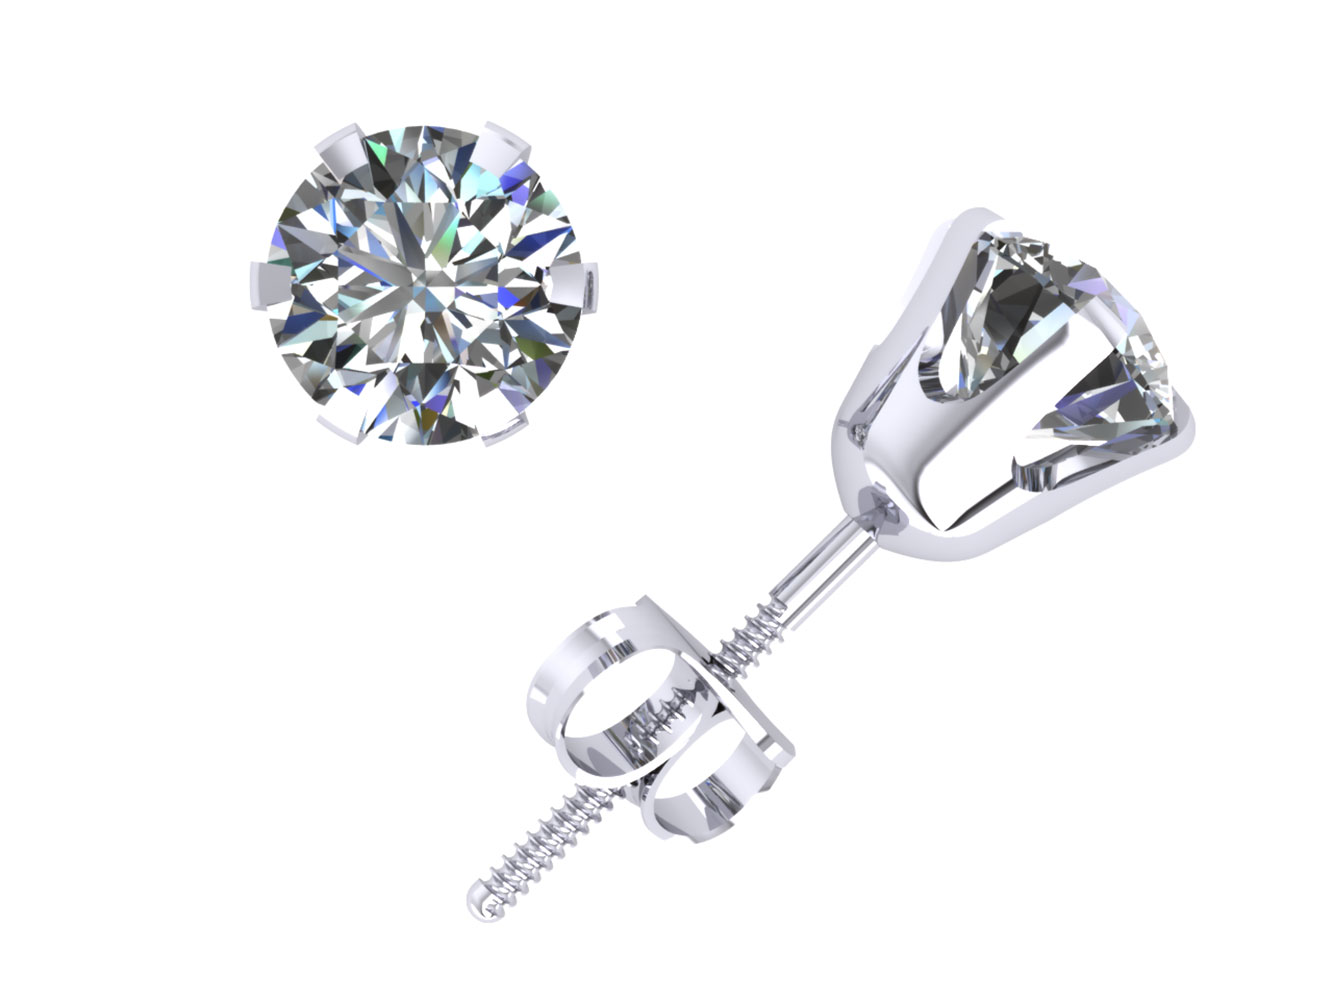 Jewel We Sell Natural 1.00Ct Round Diamond Stud Earrings 14k White or Yellow Gold 6Prong ScrewBack F VS2